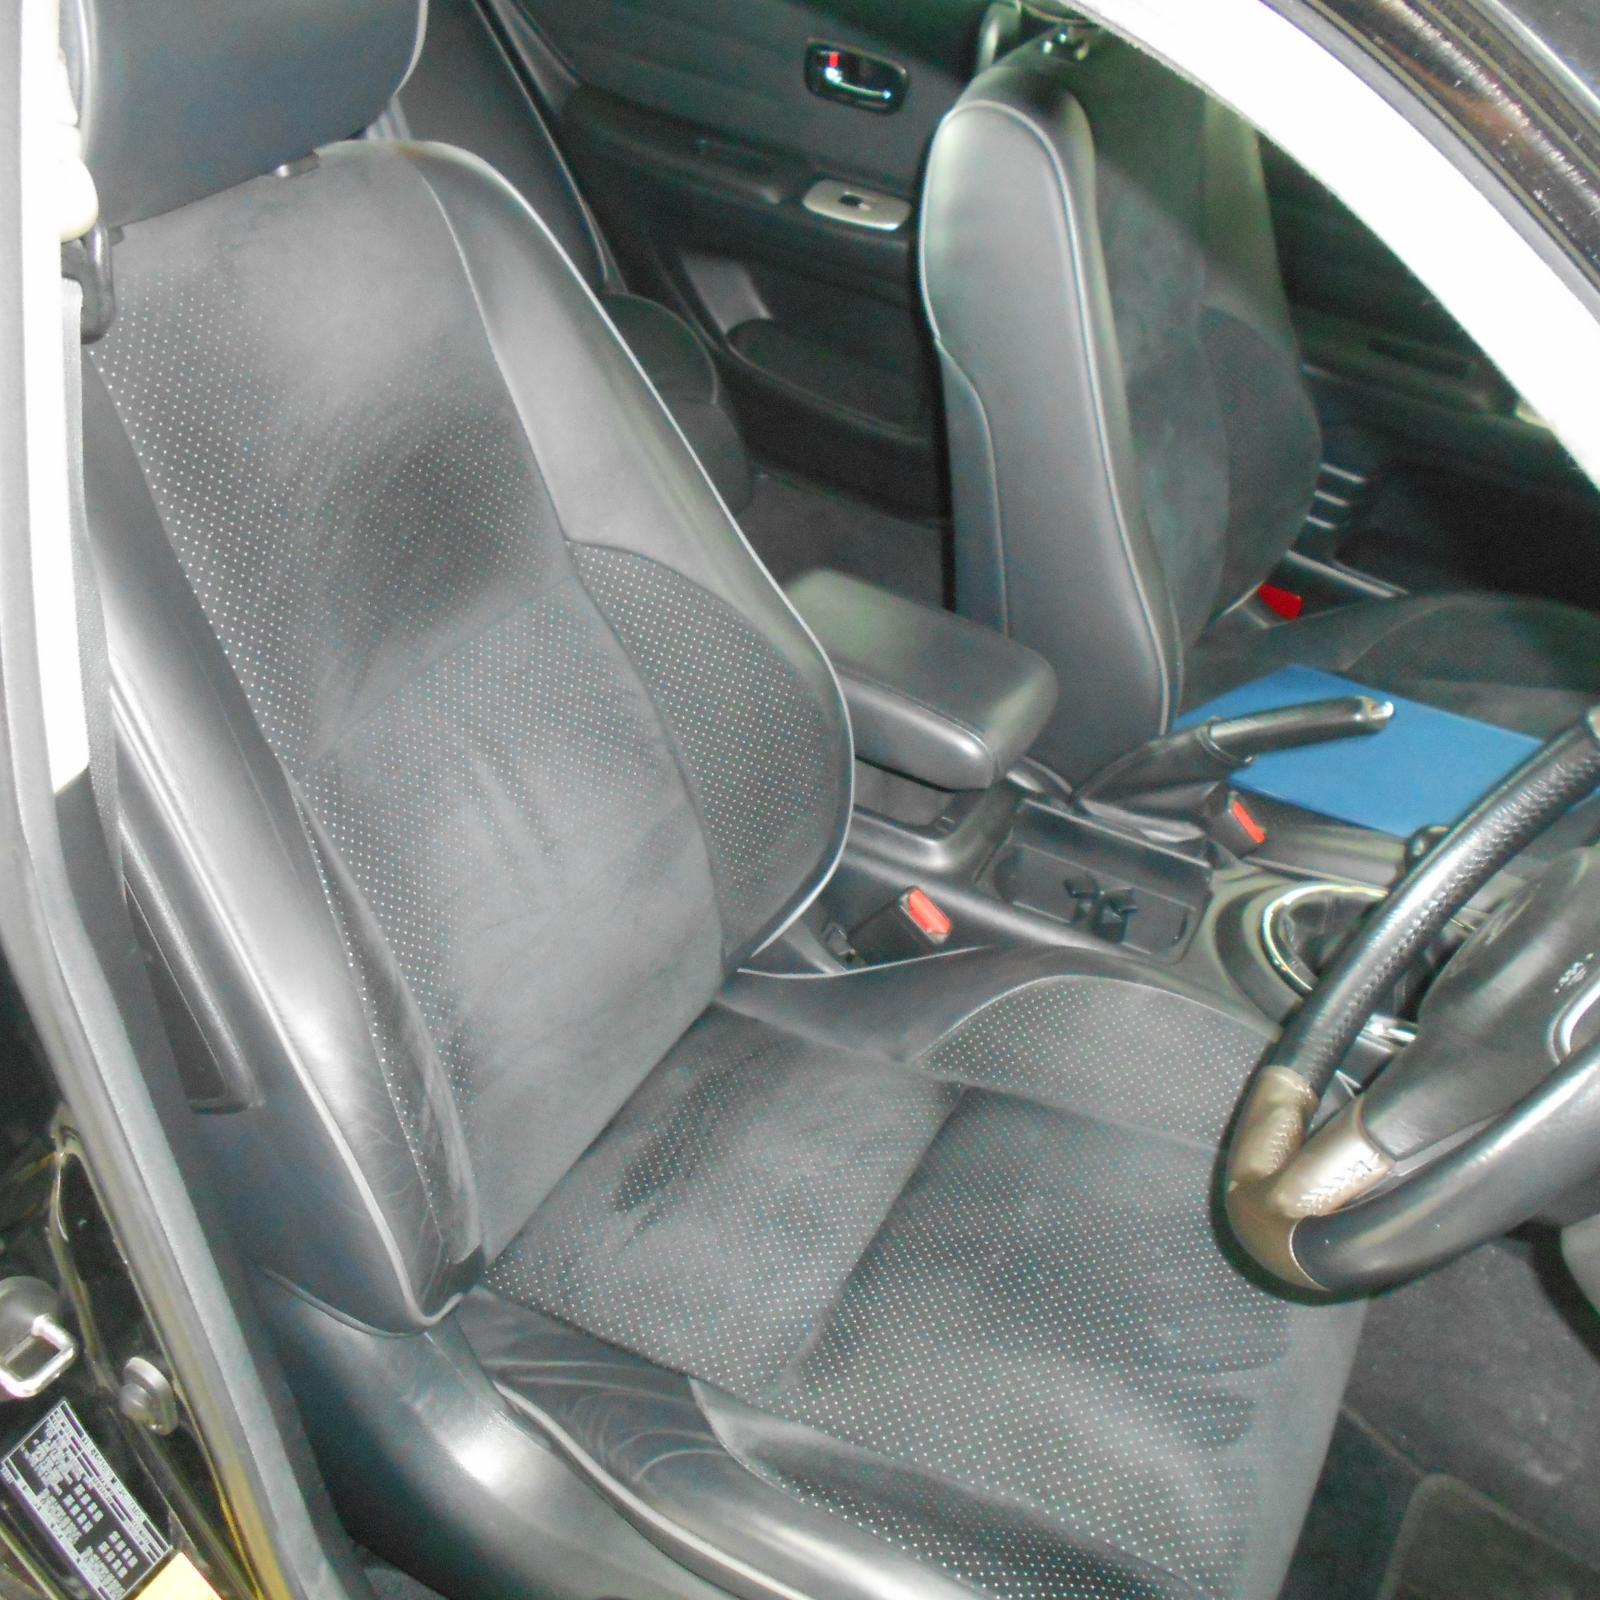 LEXUS IS200/IS300, Front Seat, RH FRONT, CLOTH, AIRBAG TYPE, 01/98-10/05